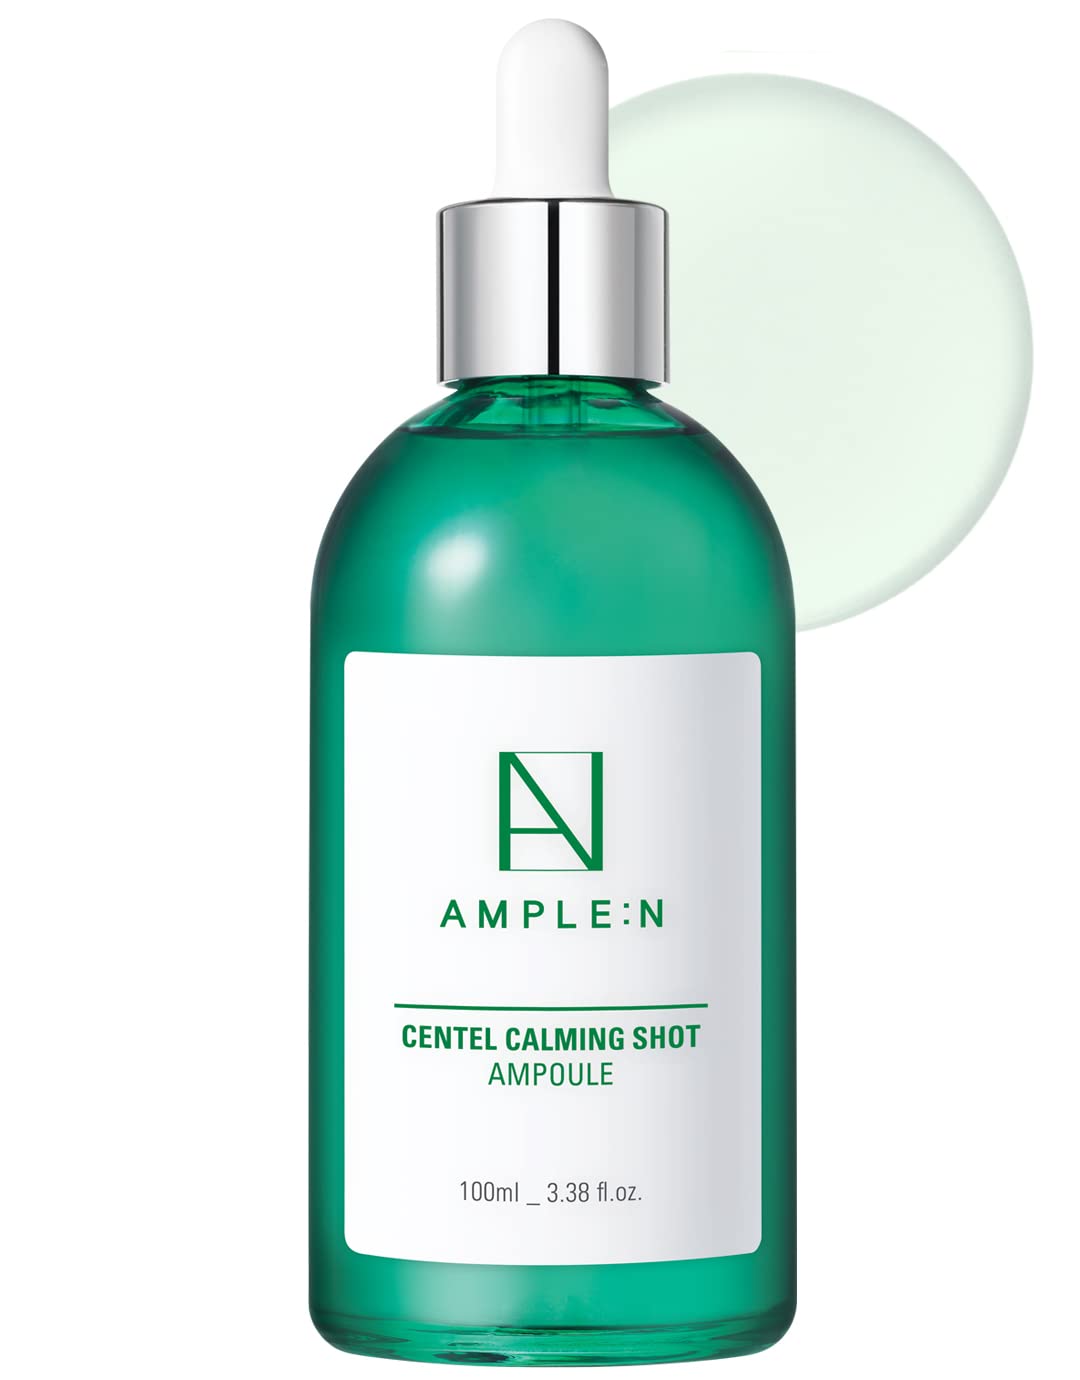 AMPLE:N Centel Calming Shot Ampoule - Soothing Face Serum with Centella Asiatica to Calm Irritated & Sensitive Skin - Redness Relief, Acne Spot Treatment & Moisturizing, 3.38 .